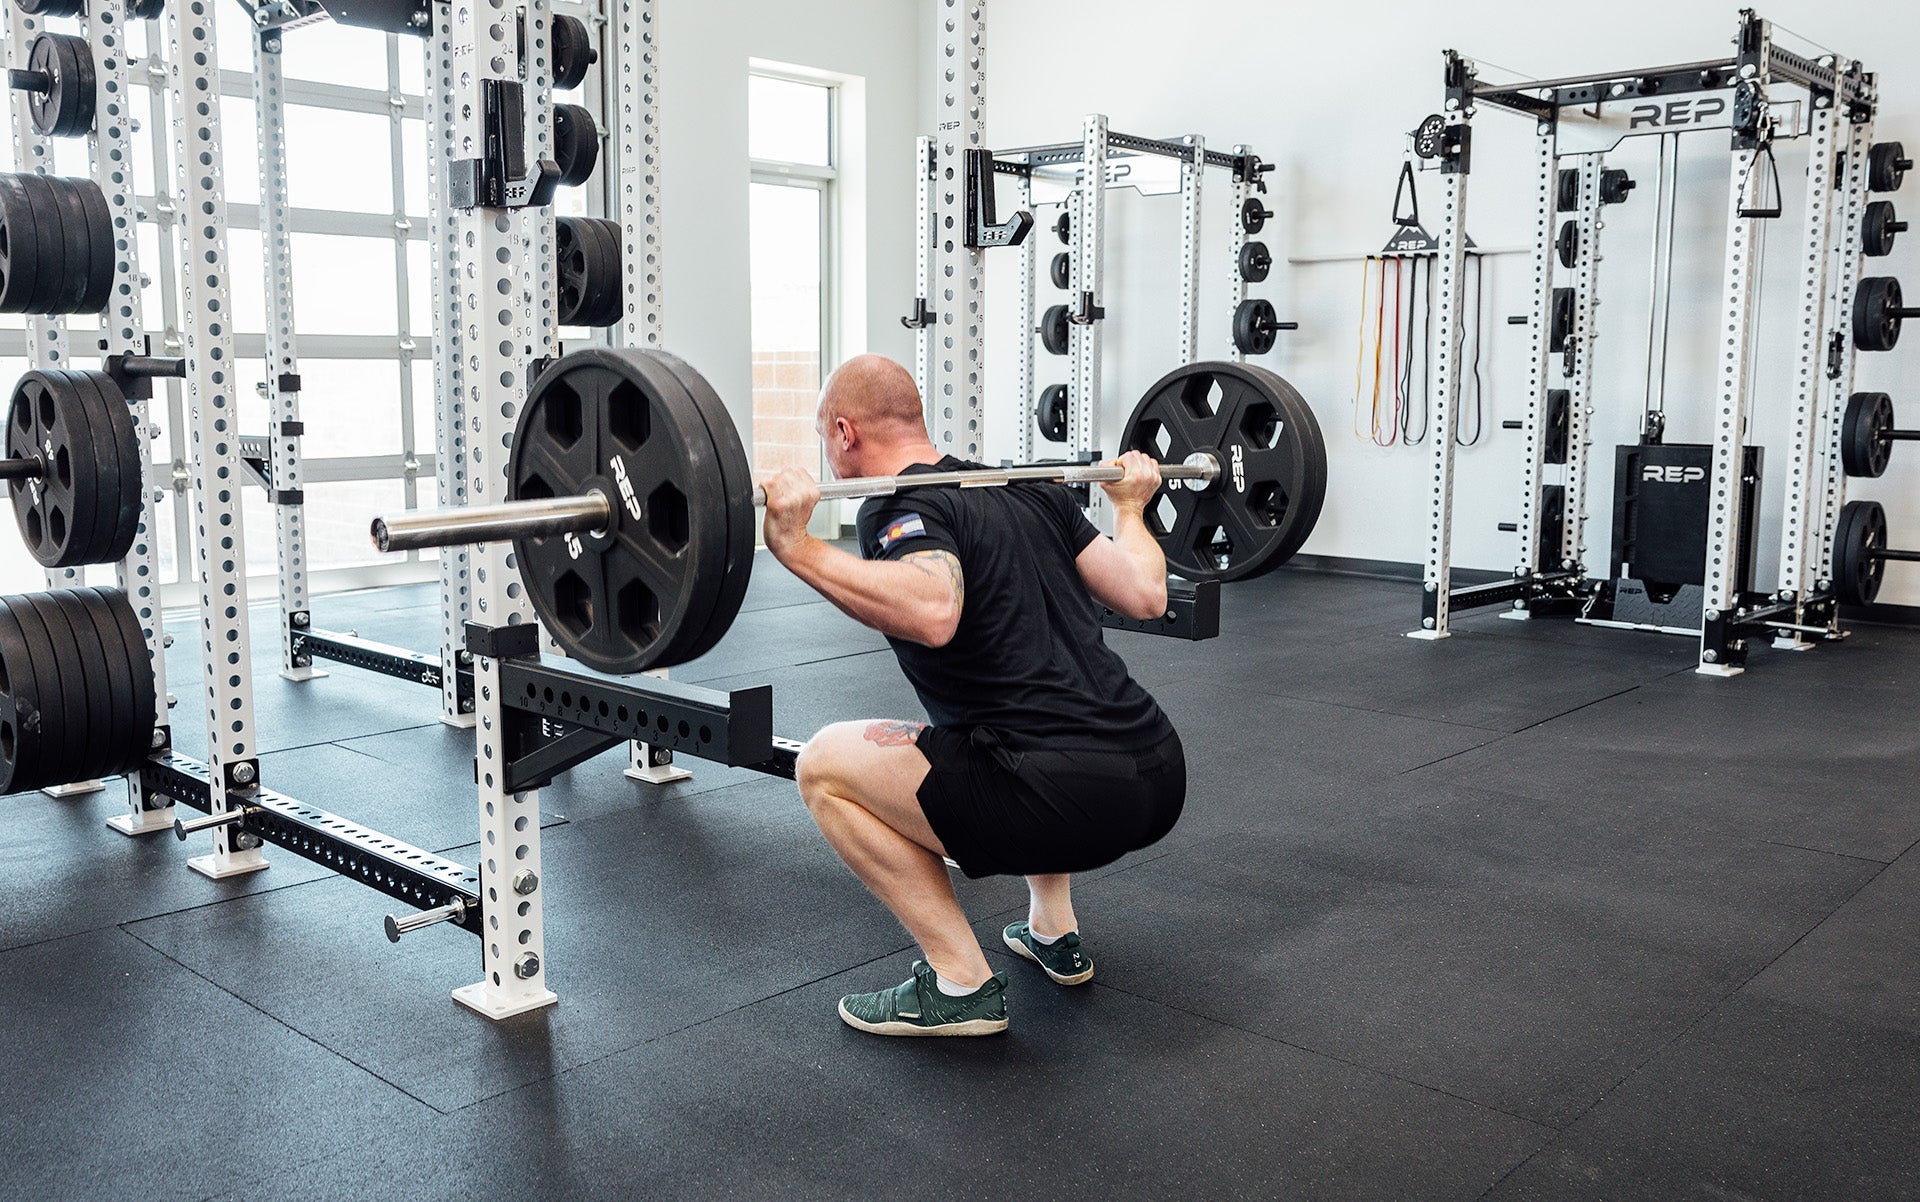 Male lifter in the bottom of a back squat with a loaded REP Double Black Diamond Power Bar.